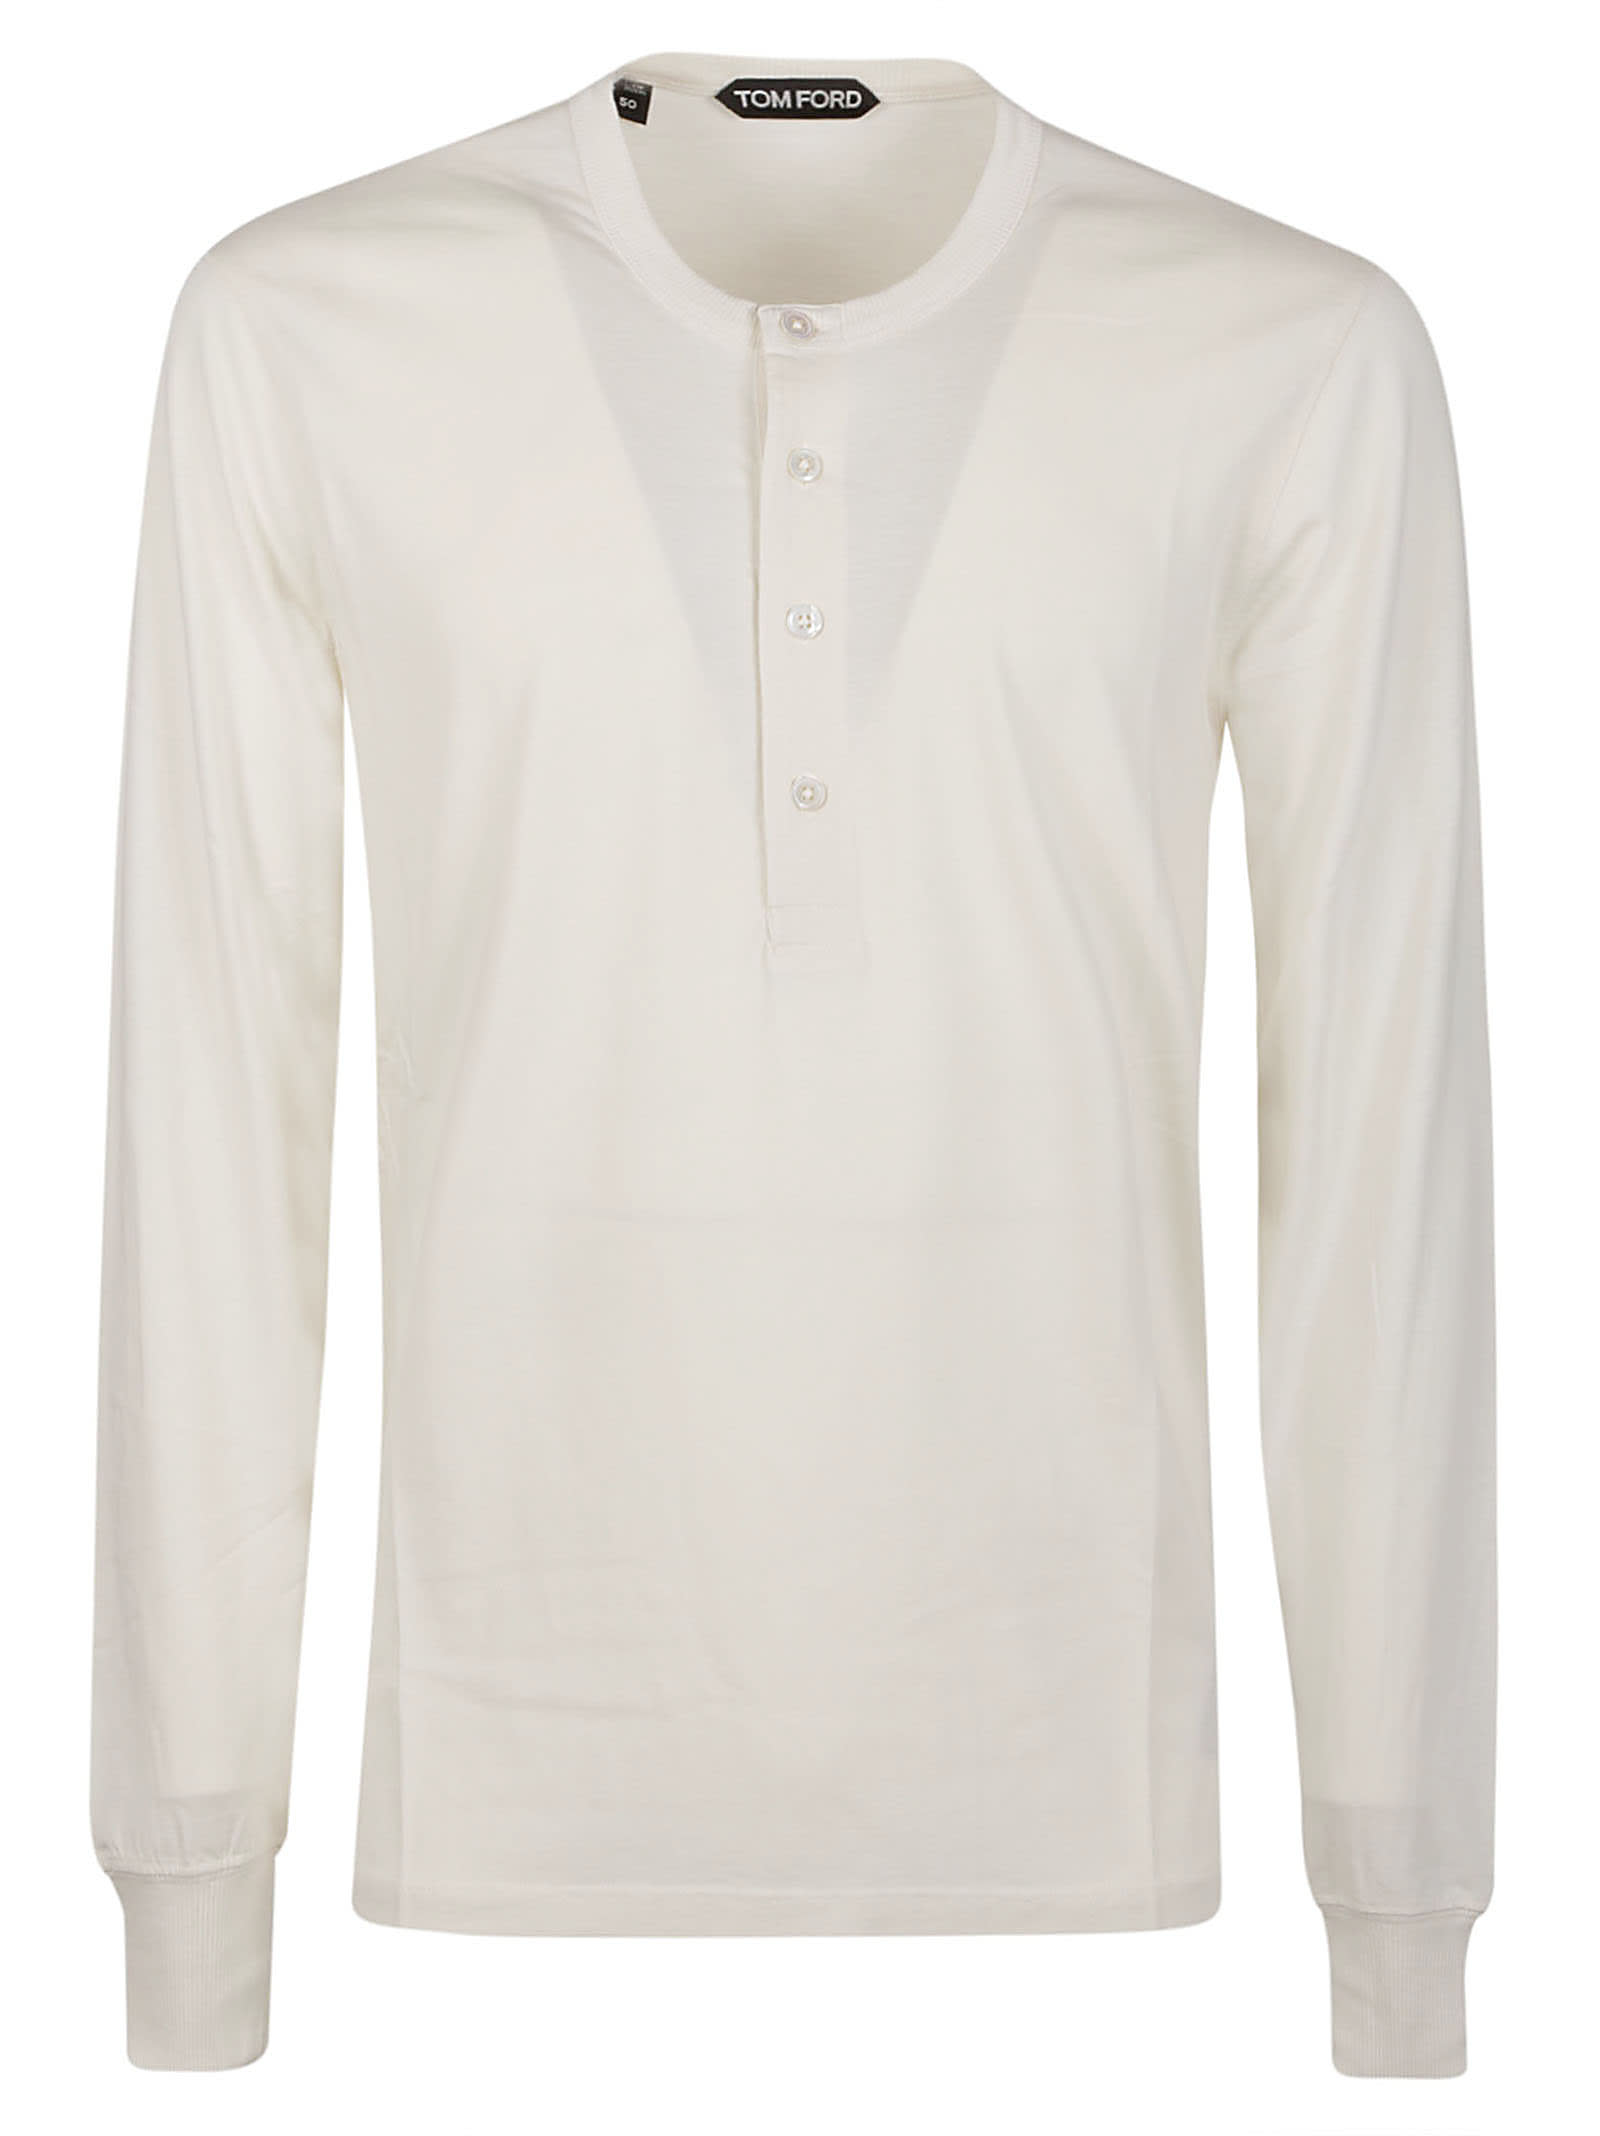 TOM FORD HENLEY LONG SLEEVE BUTTONED T-SHIRT